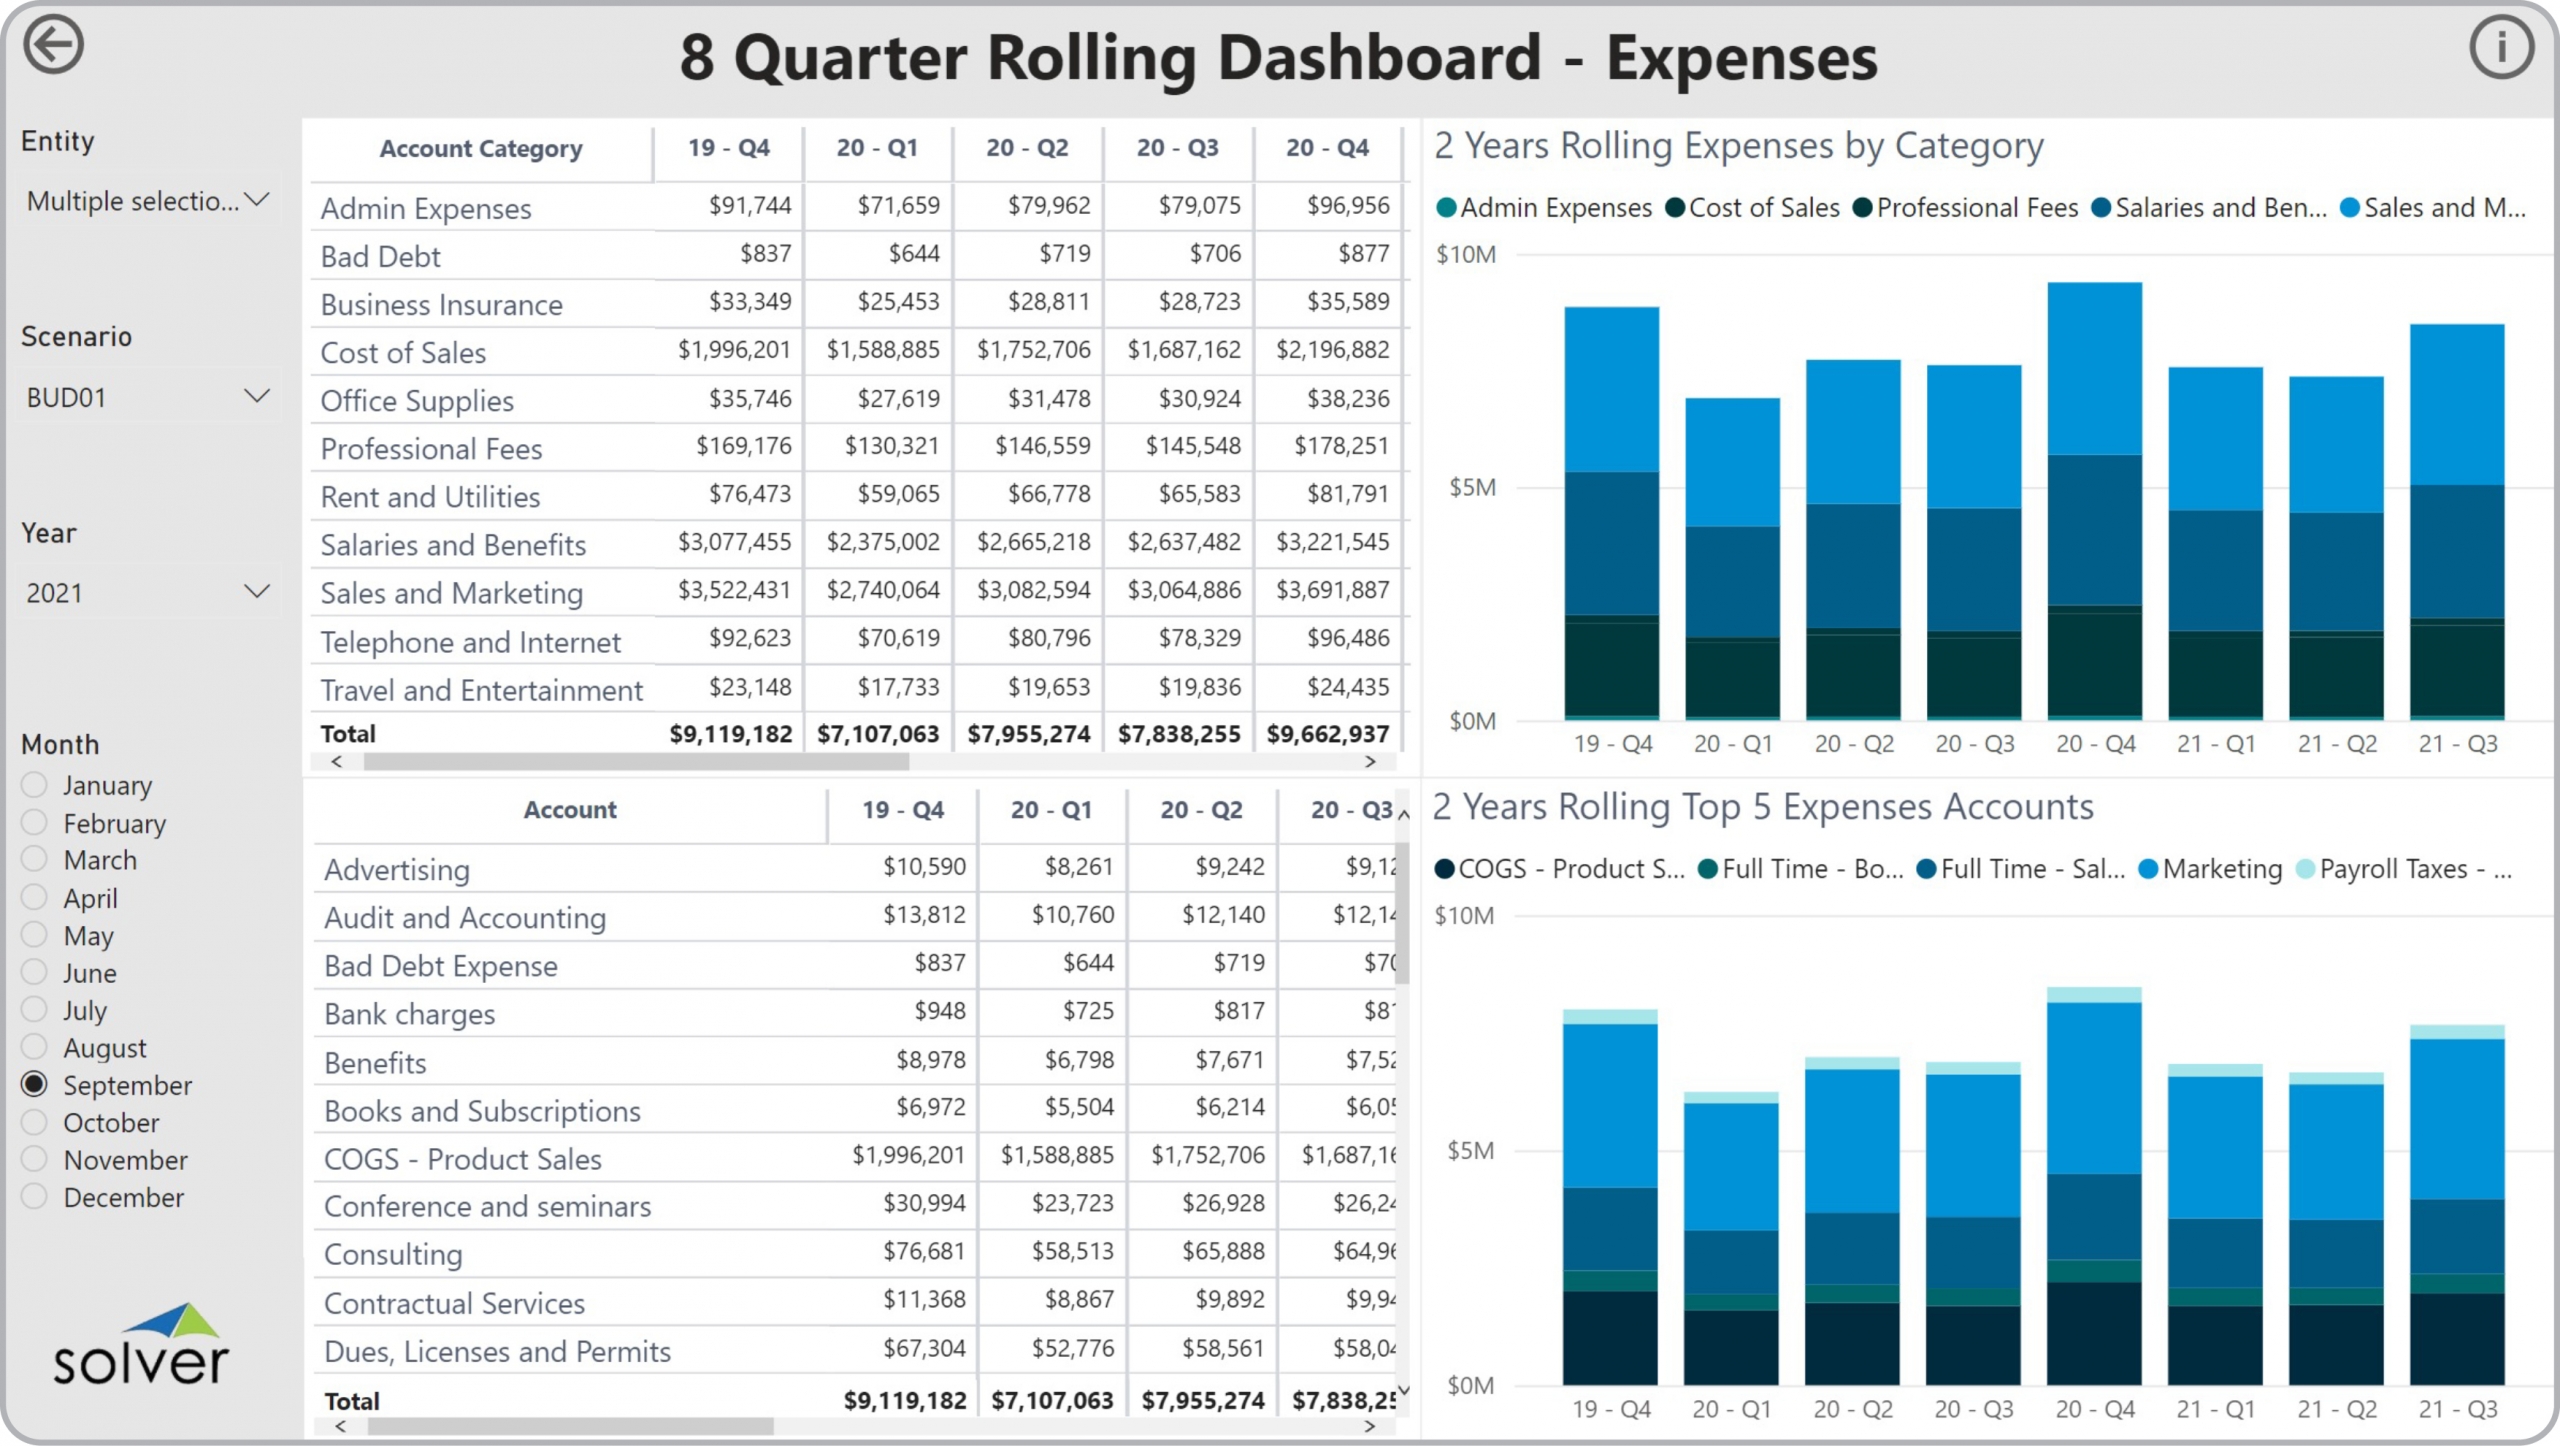 Example of an 8 Quarter Rolling Expense Dashboard to Streamline the Monthly Reporting Process